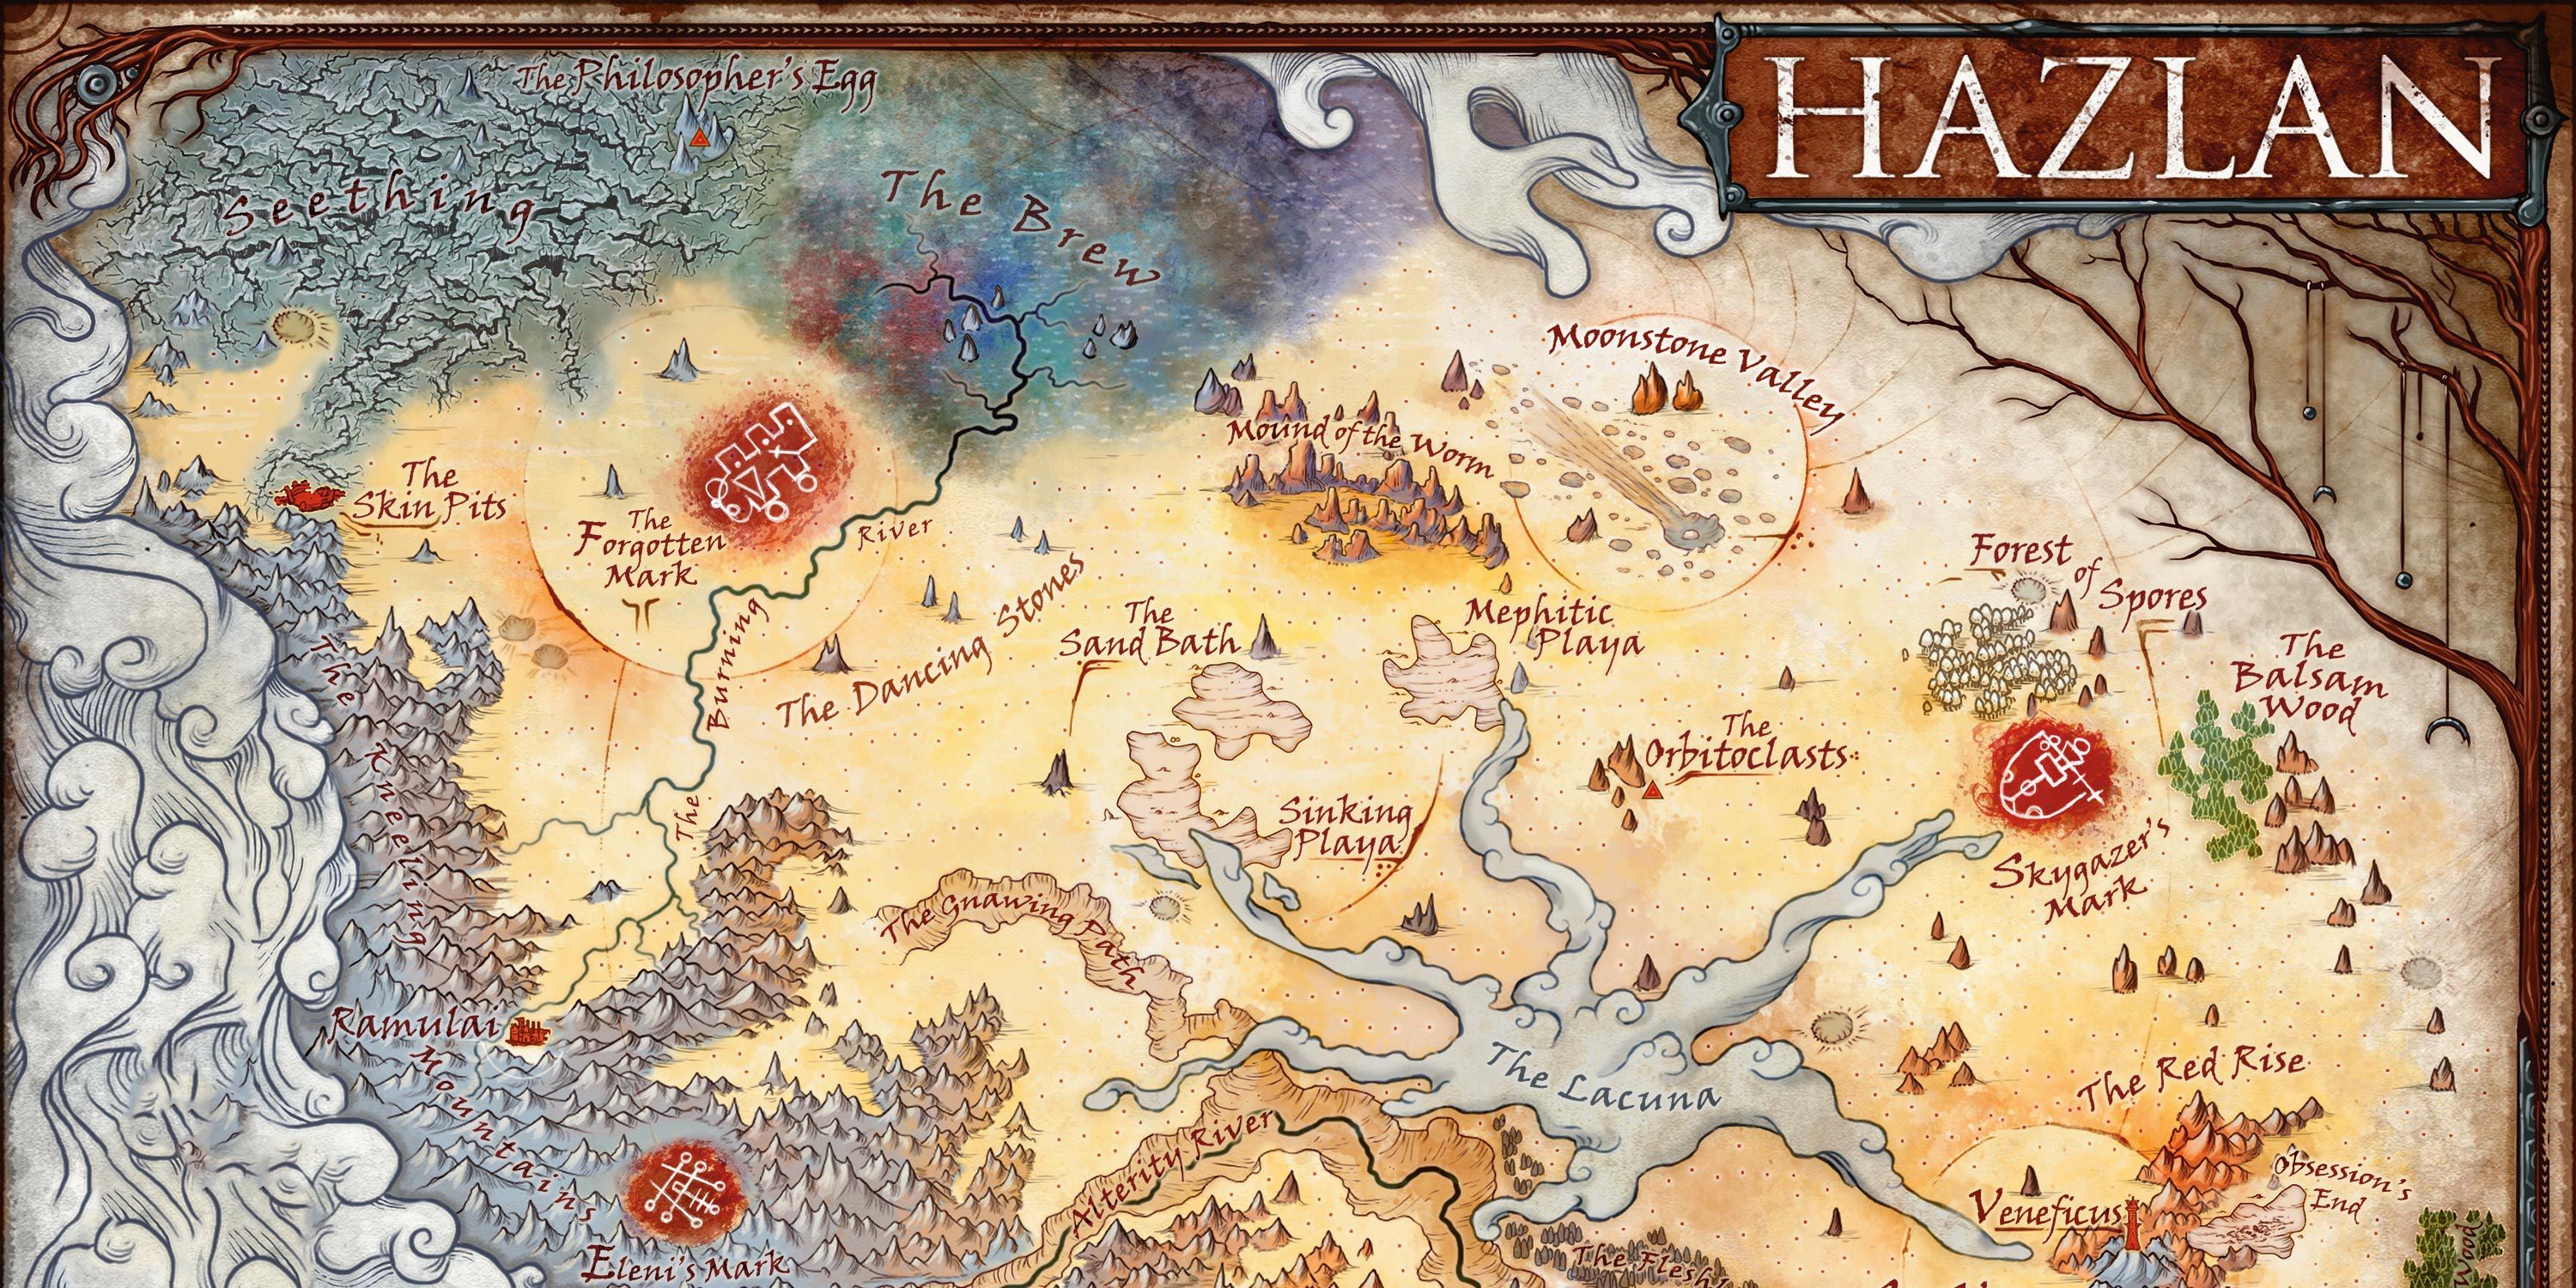 A hand-drawn map of the domain of Hazlan